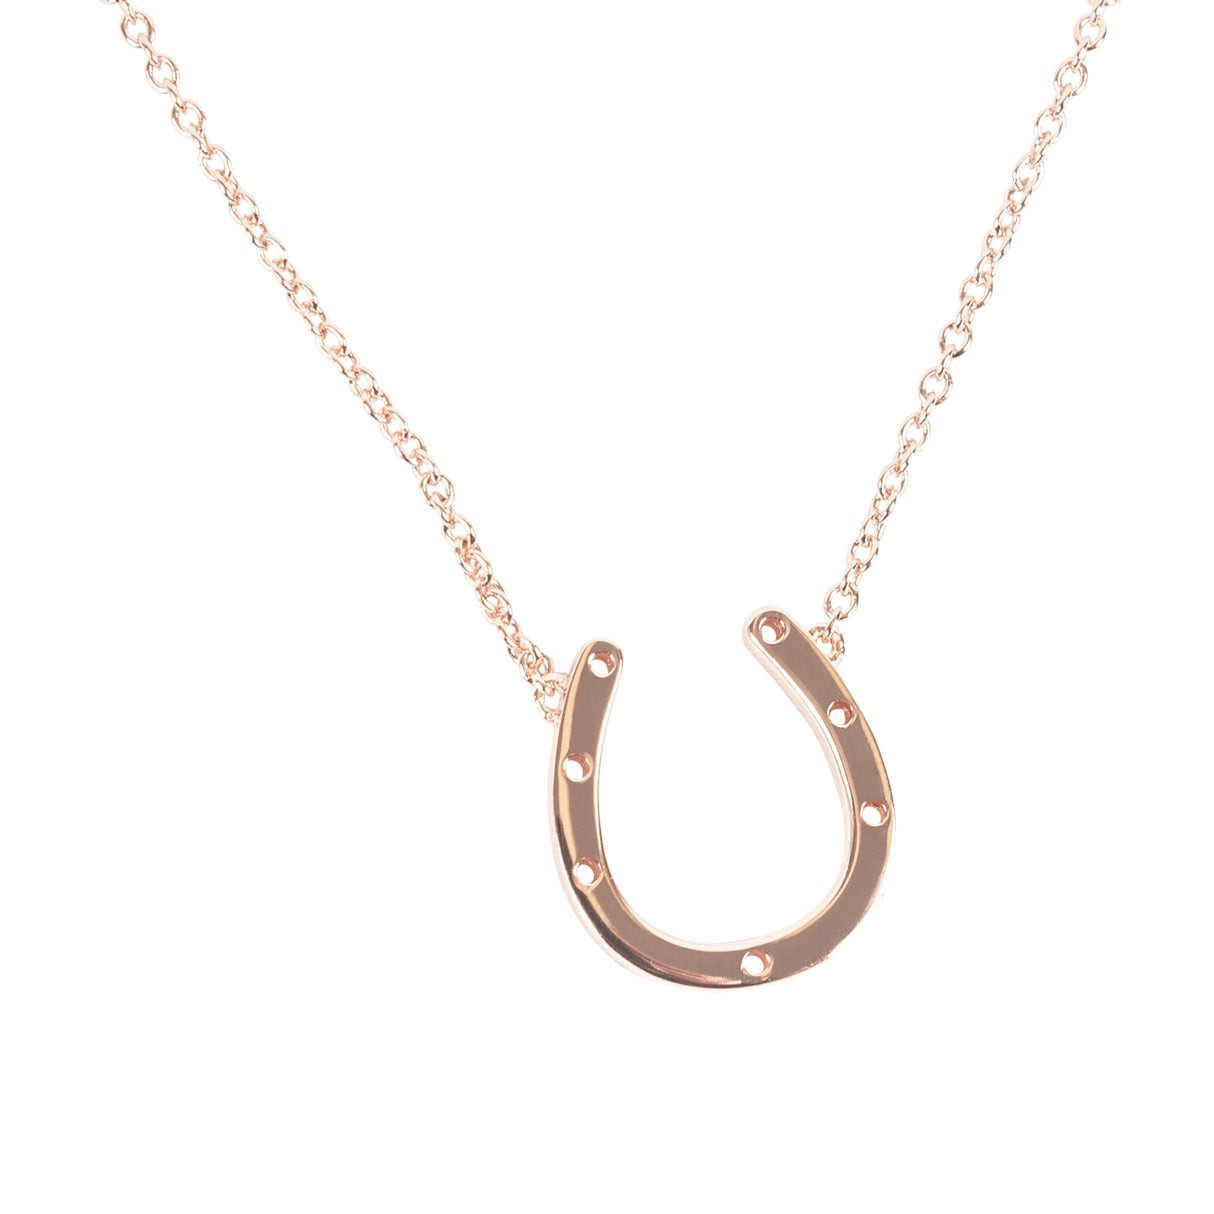 Cinto by Kelly Herd Rose Gold Horseshoe Pendant Necklace